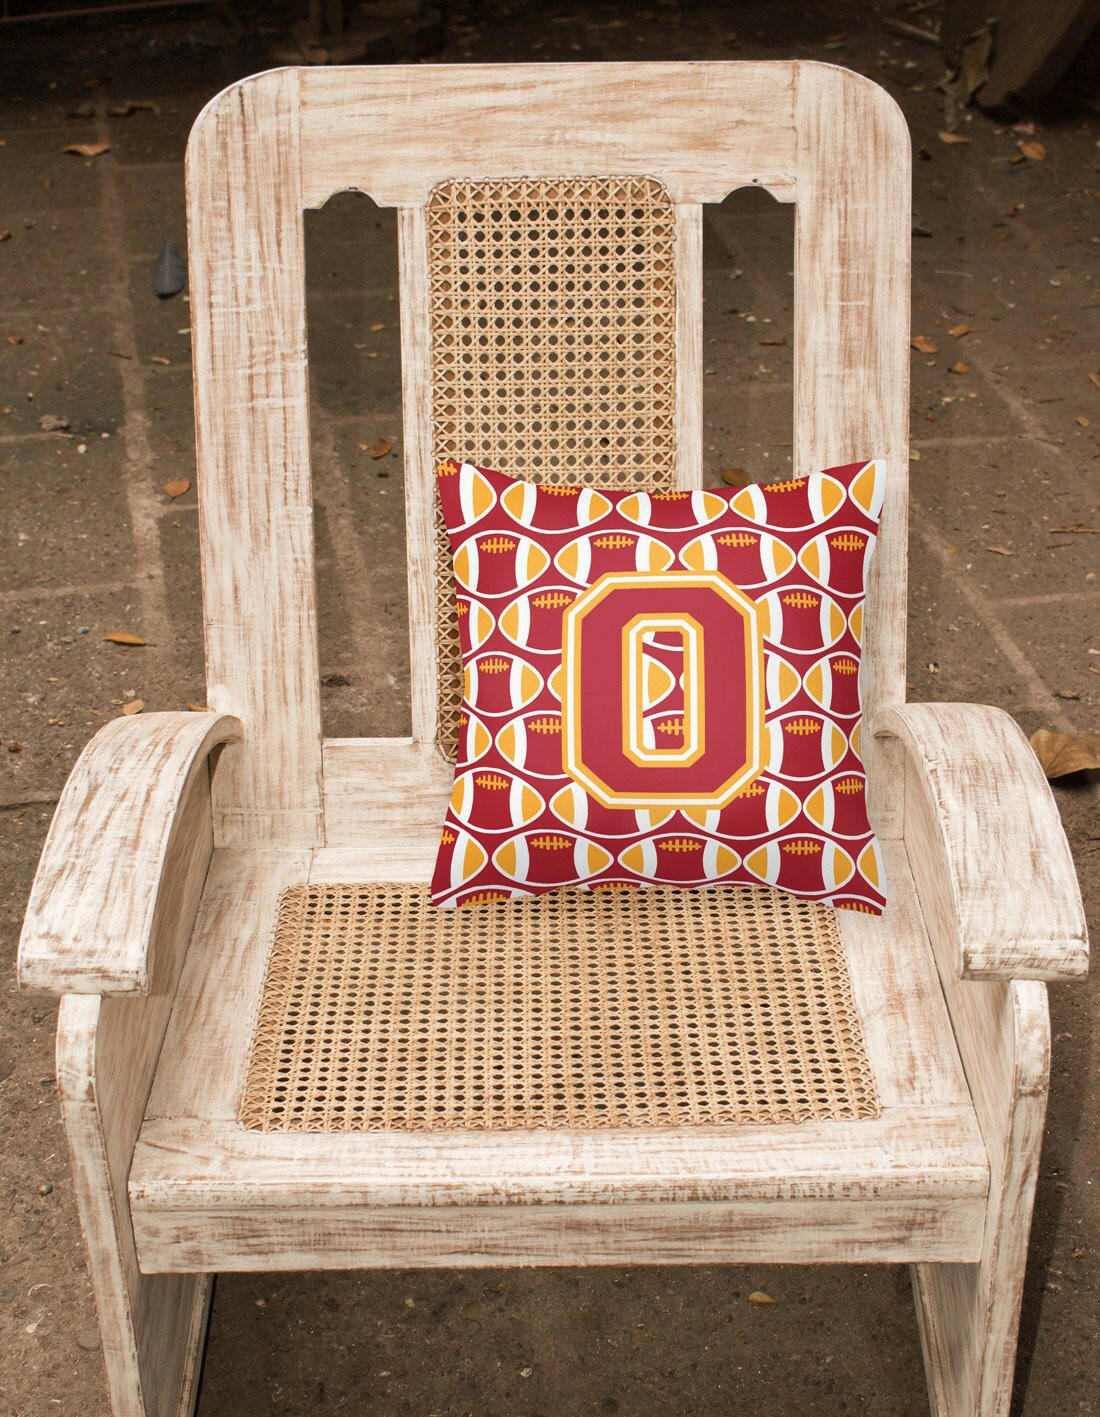 Letter O Football Cardinal and Gold Fabric Decorative Pillow CJ1070-OPW1414 by Caroline's Treasures